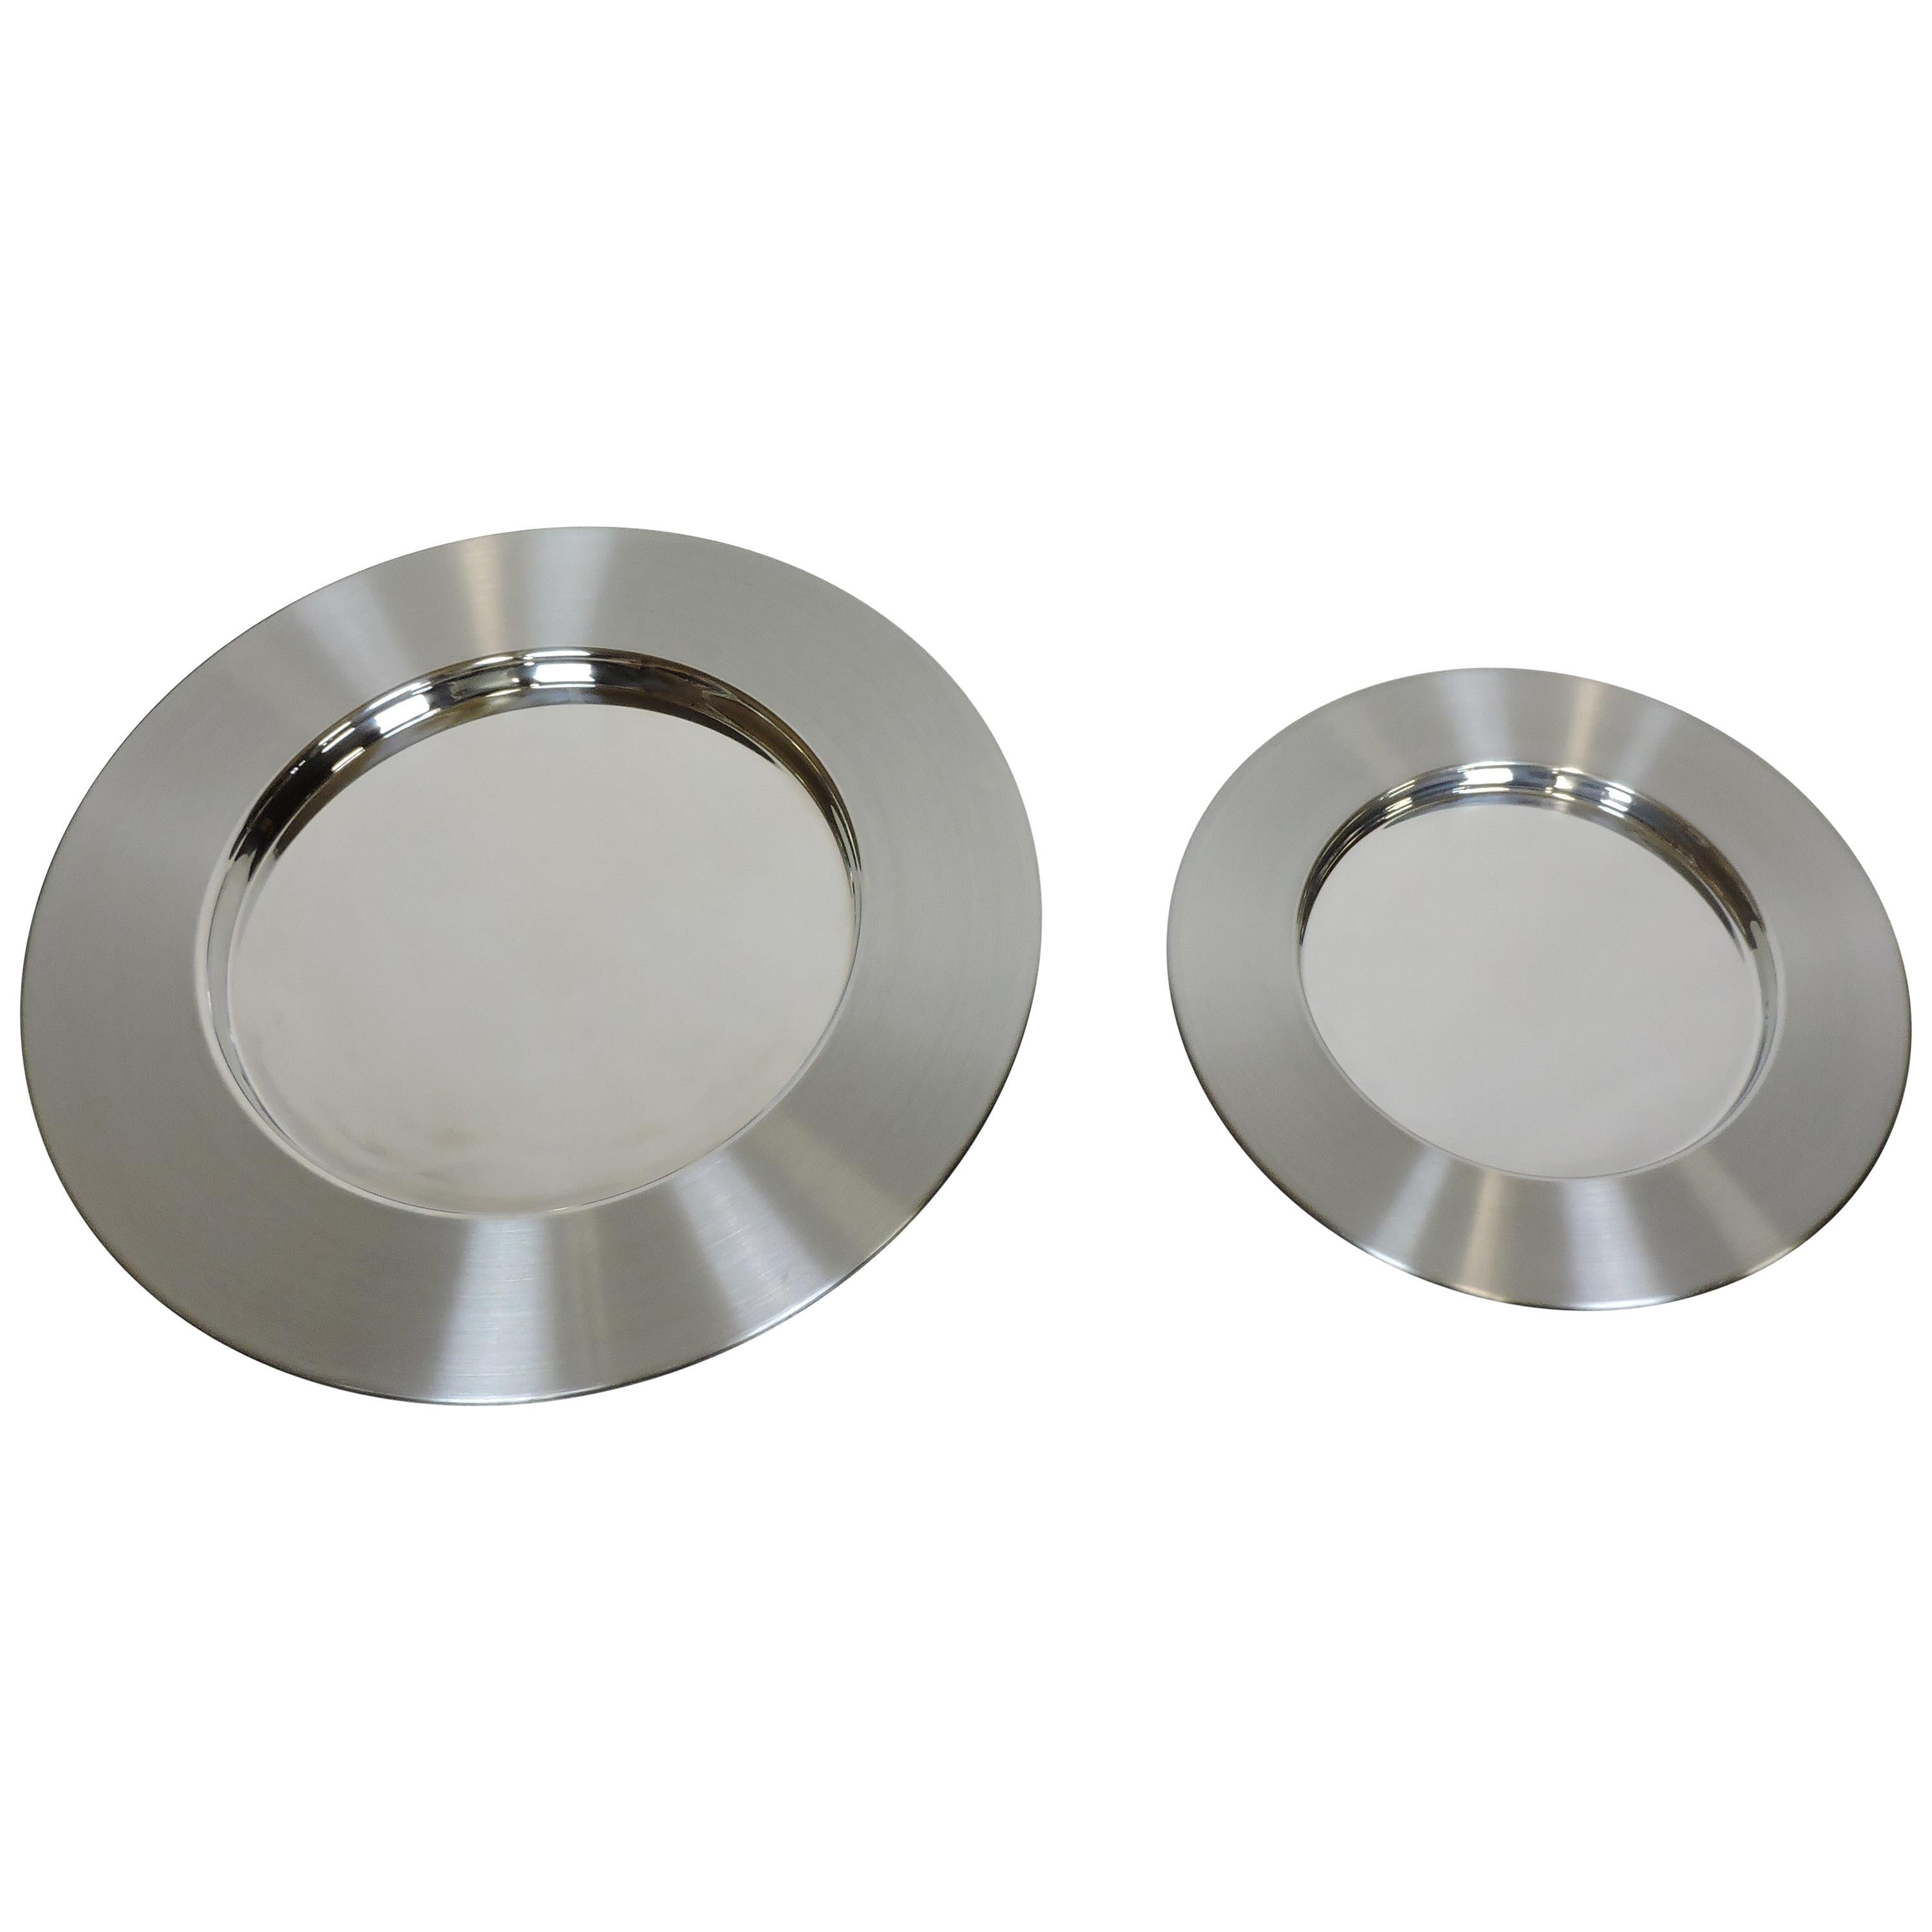 Two Timo Sarpaneva Scandinavian Modern Large Stainless Steel Chargers Platters